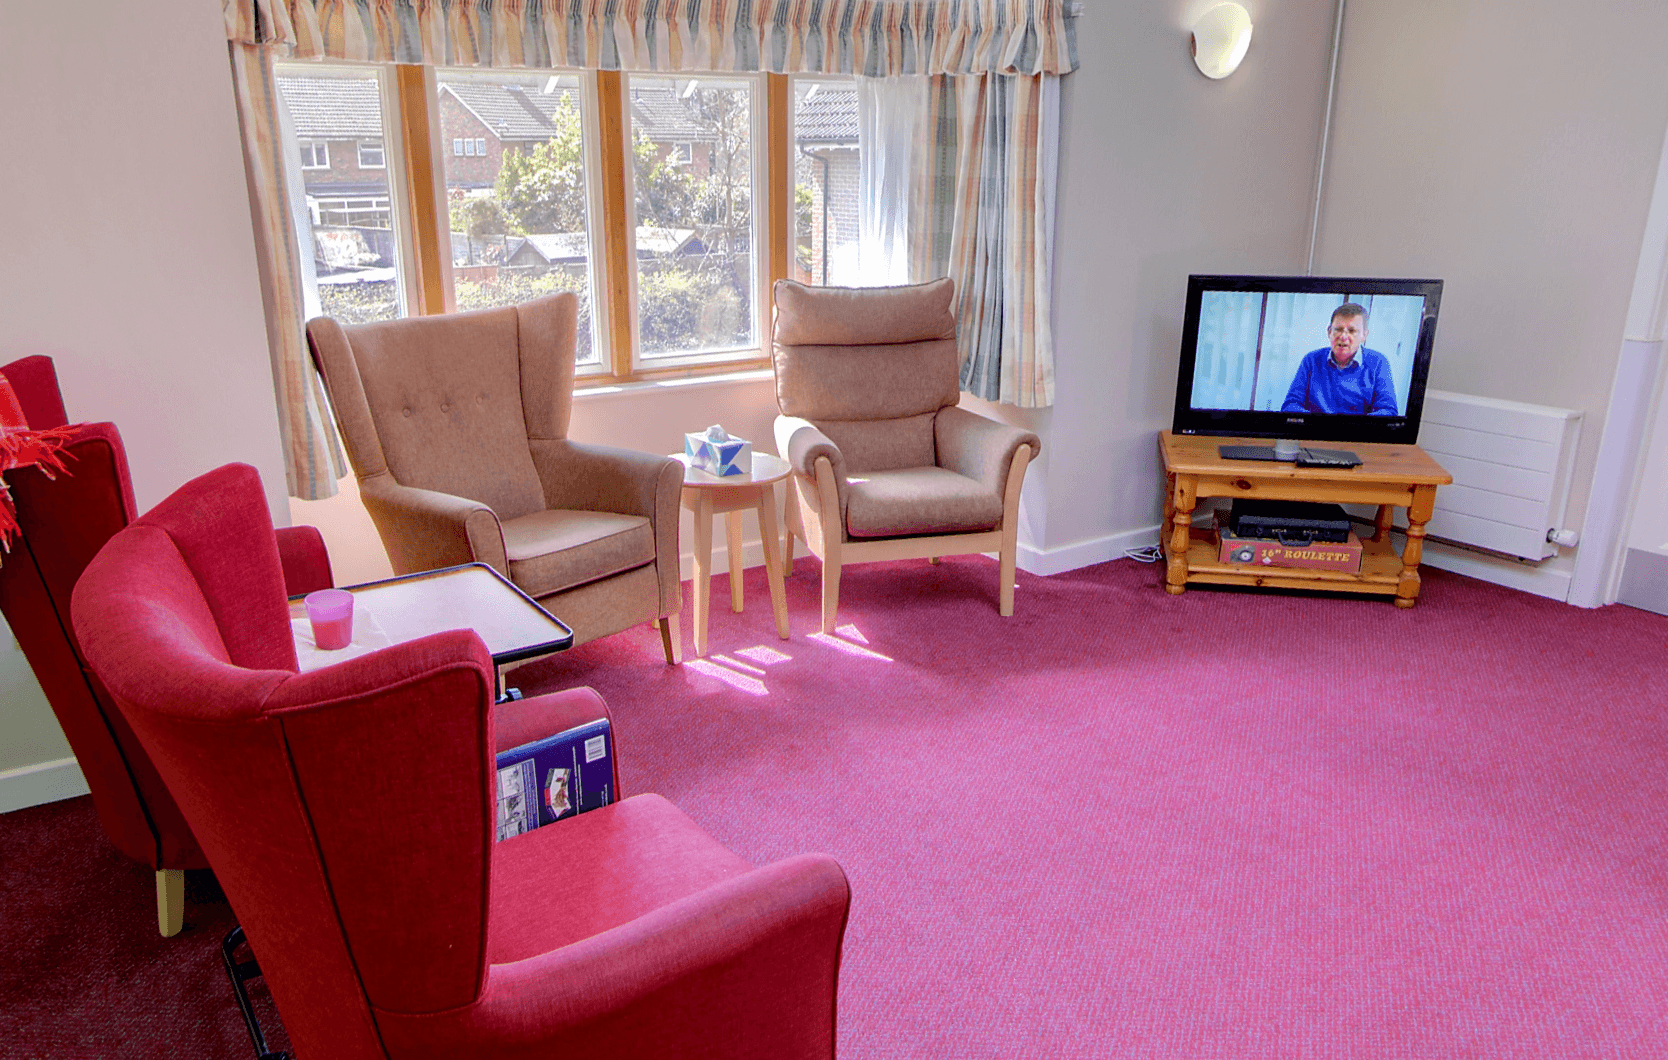 Shaw Healthcare - Deerswood Lodge care home 005